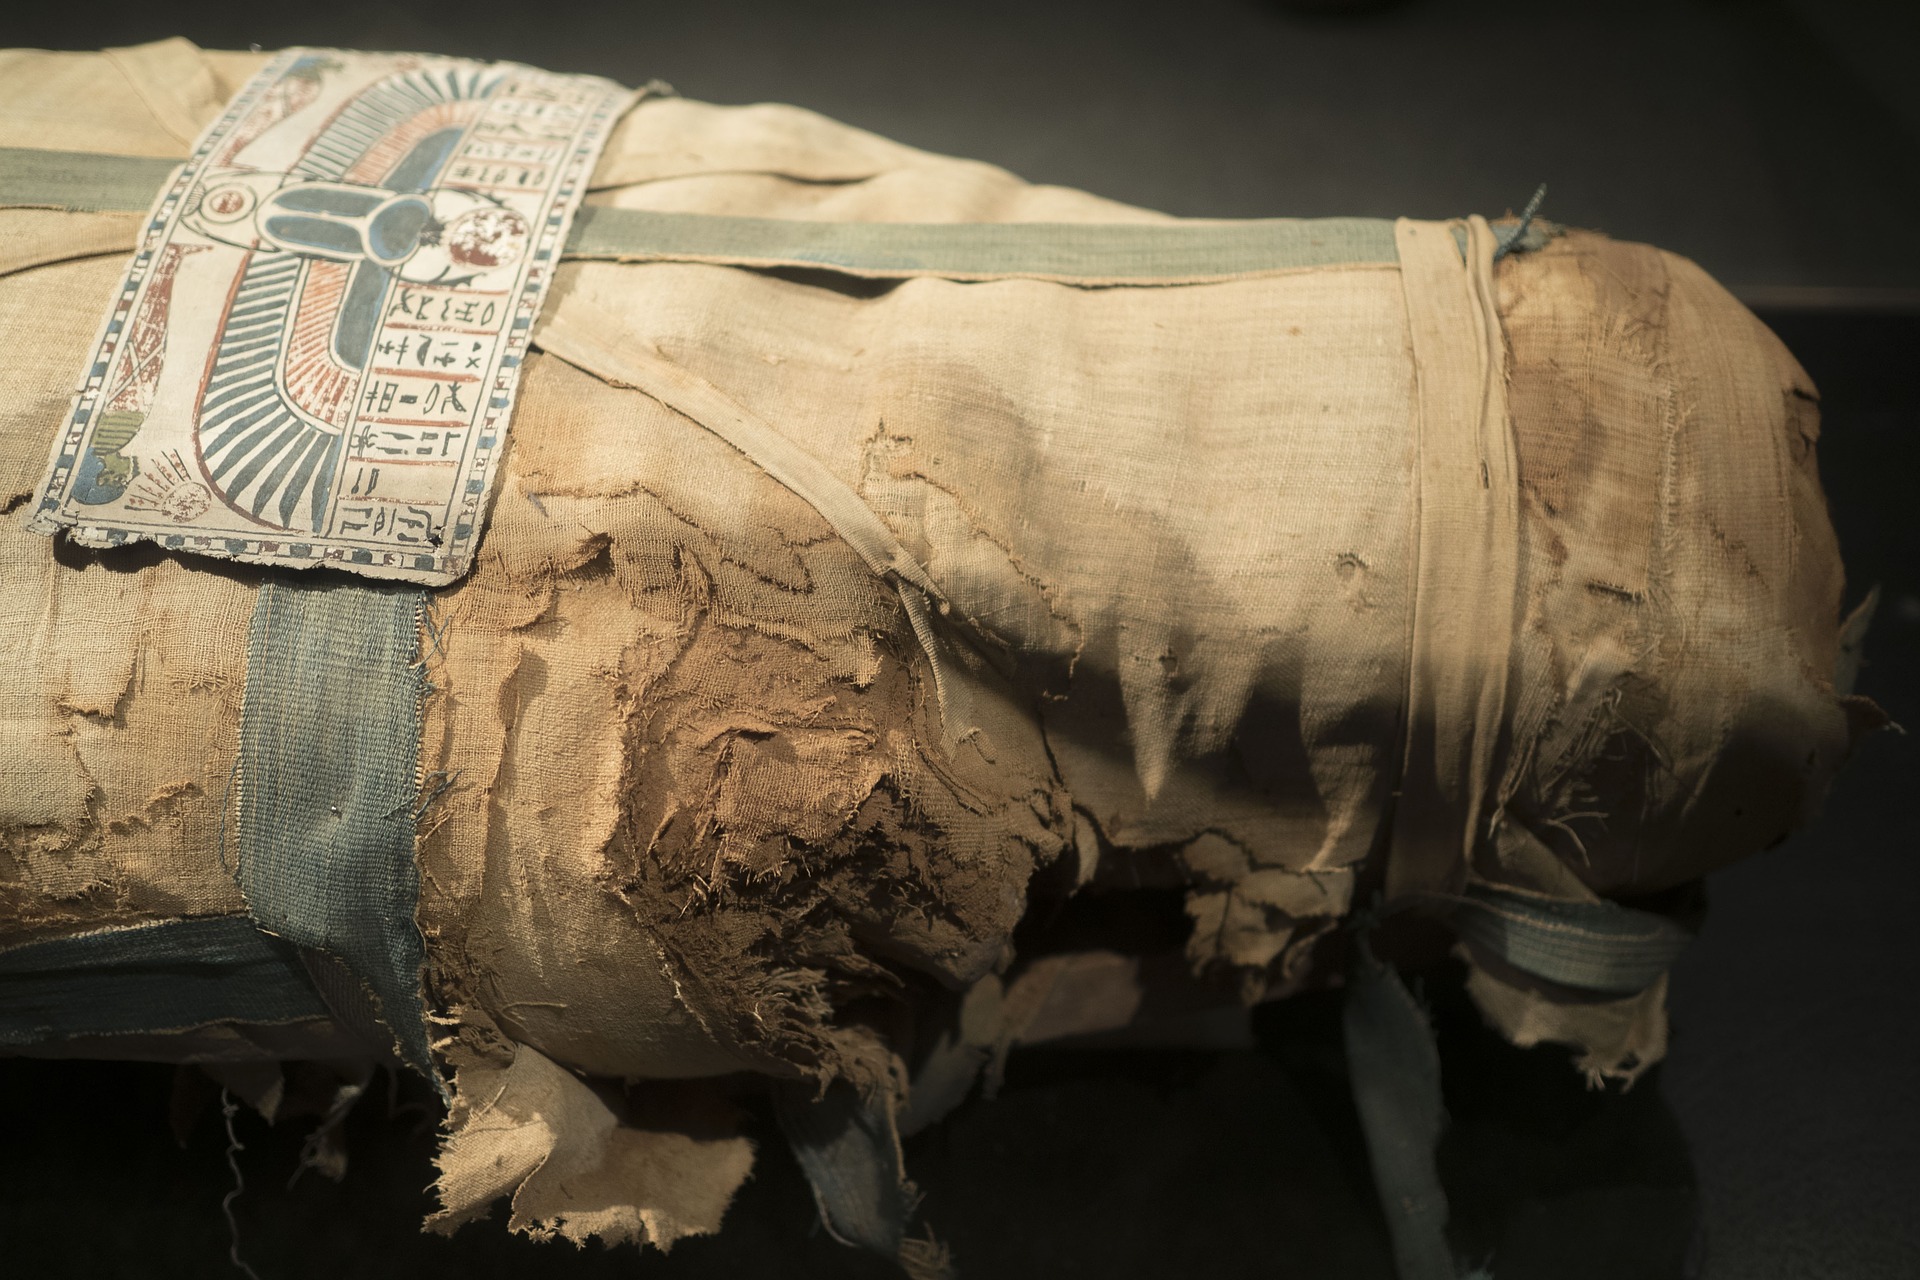 Egyptian mummy unwrapping – the original unboxing video